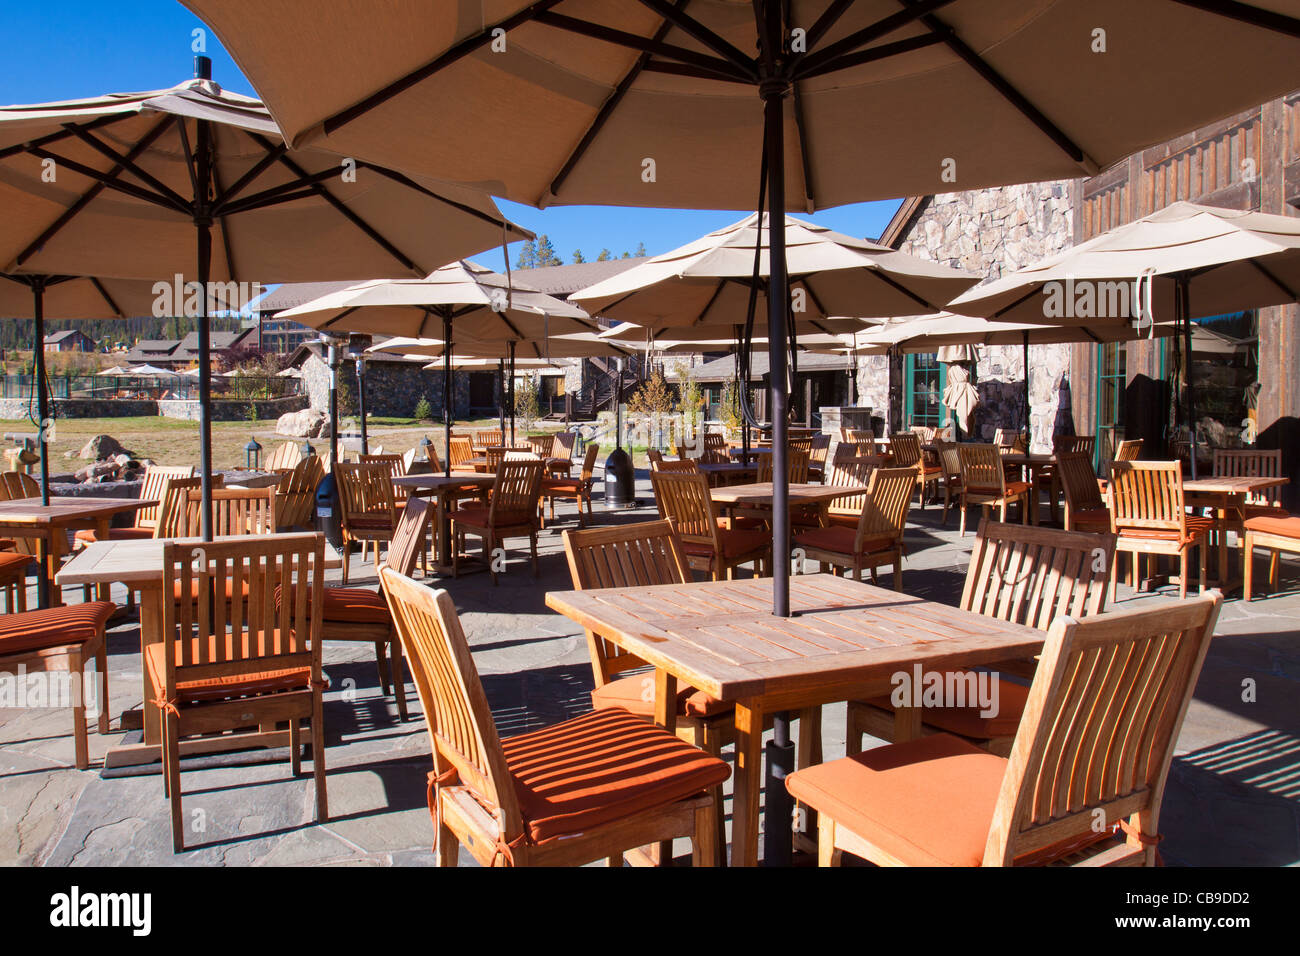 Outdoor patio dining at a mountain resort lodge with umbrellas over wood tables and chairs Stock Photo